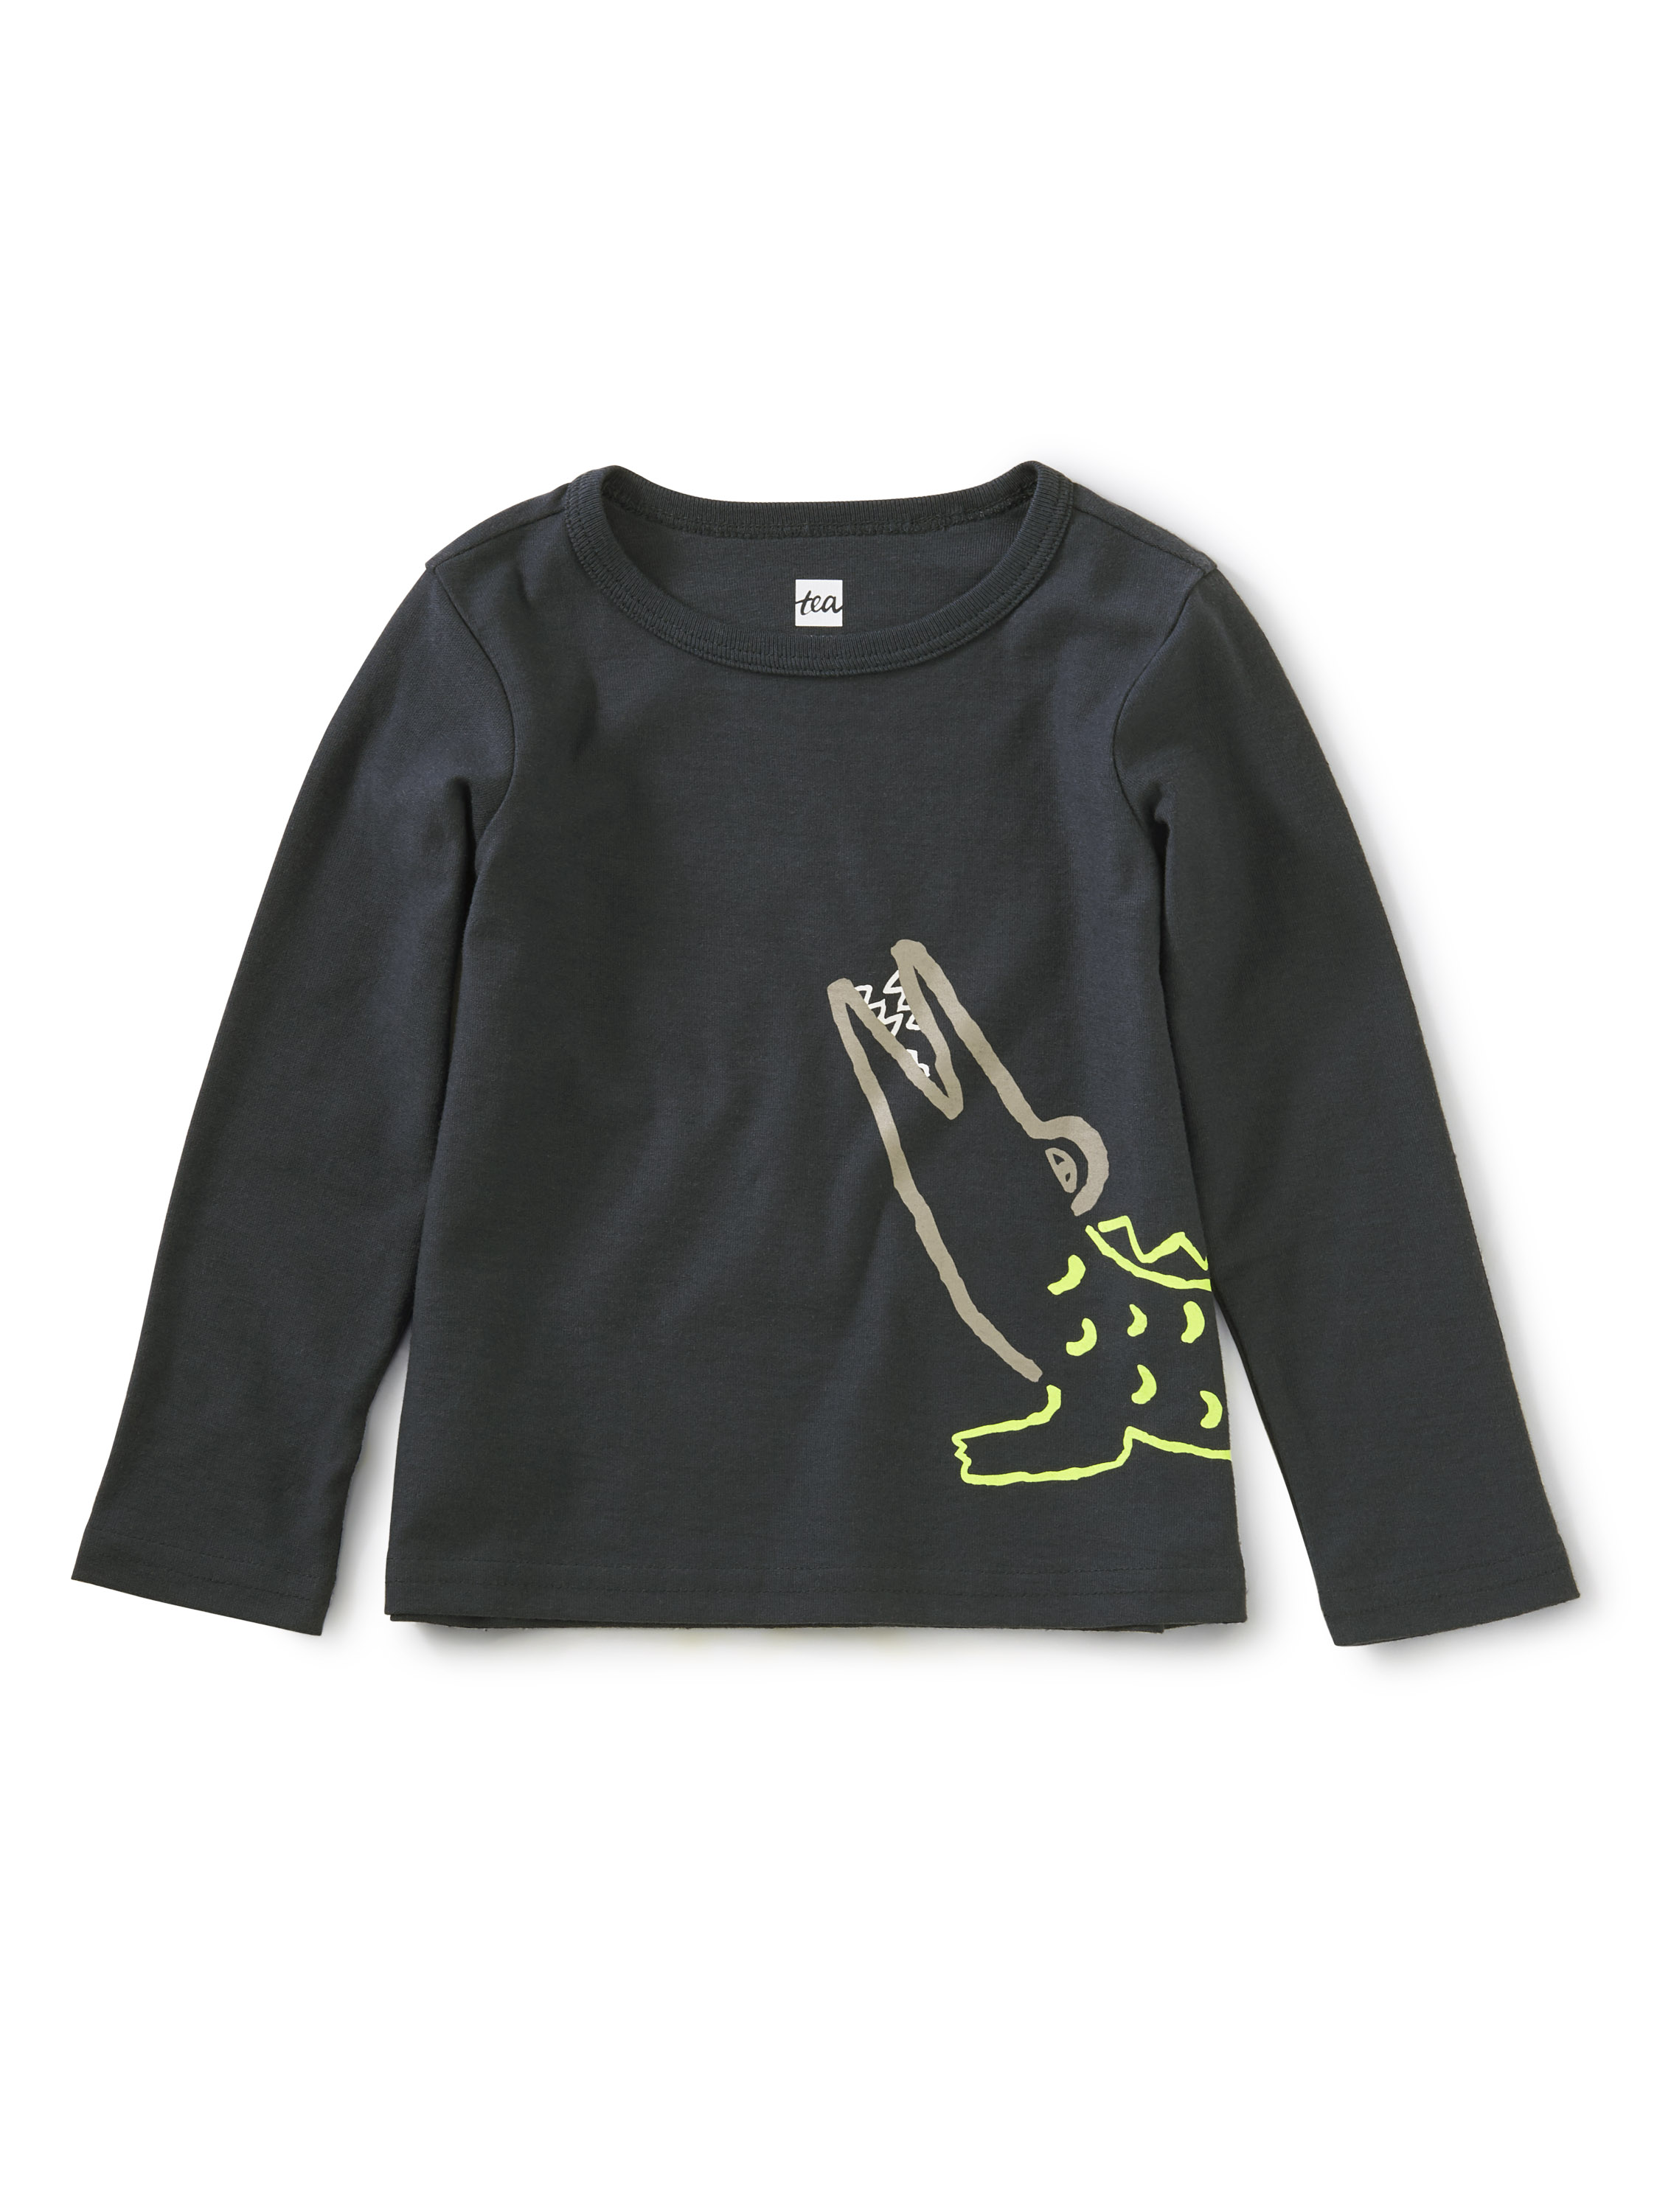 Awesome Alligator Graphic Tee | Tea Collection